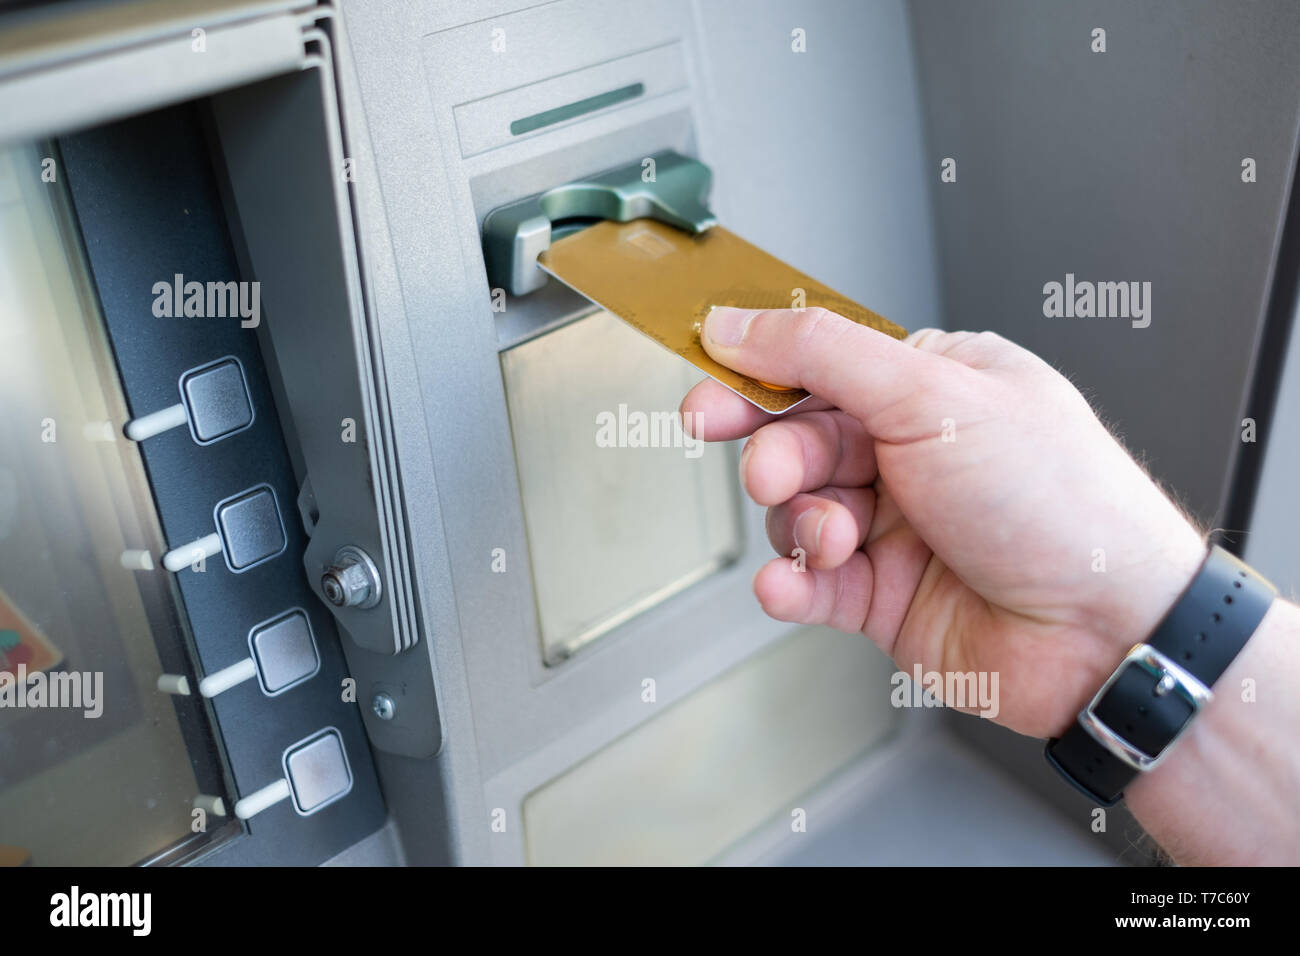 Close up of one hand inserting ATM credit card into bank machine to withdraw money Stock Photo